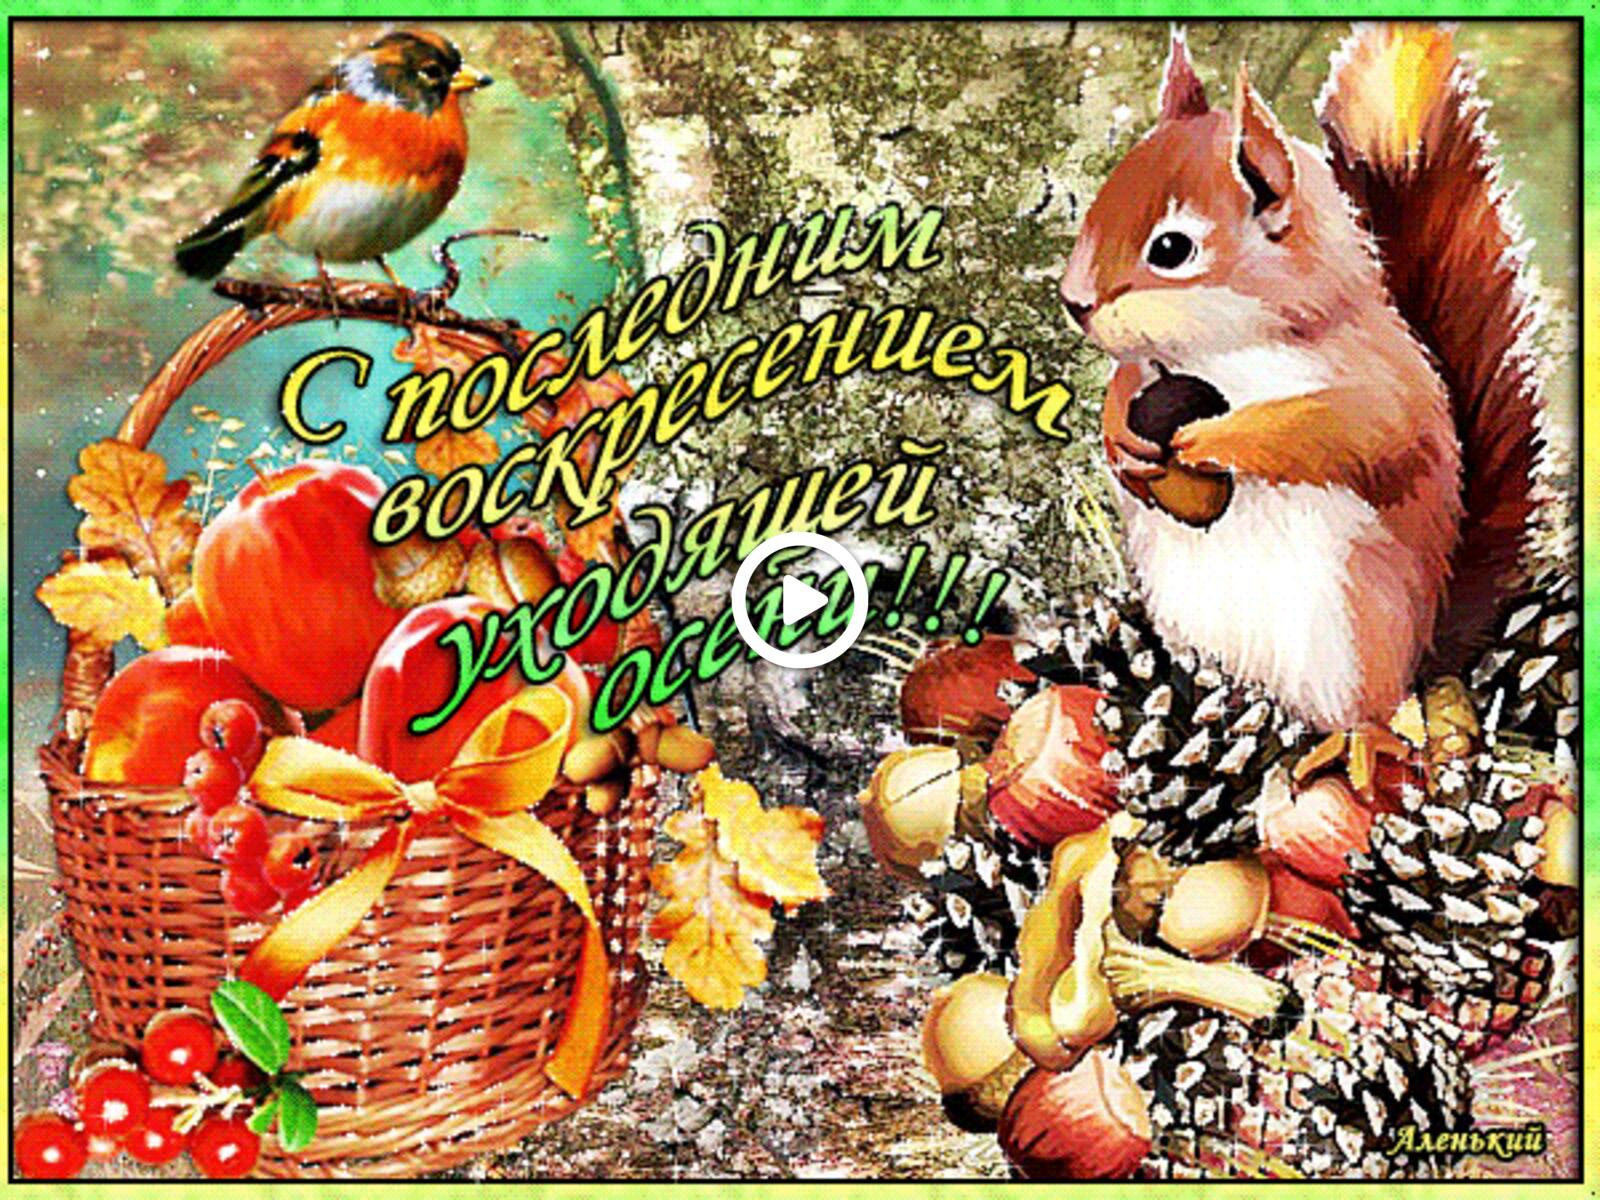 A postcard on the subject of happy last sunday in september happy last day of september gifs animals for free